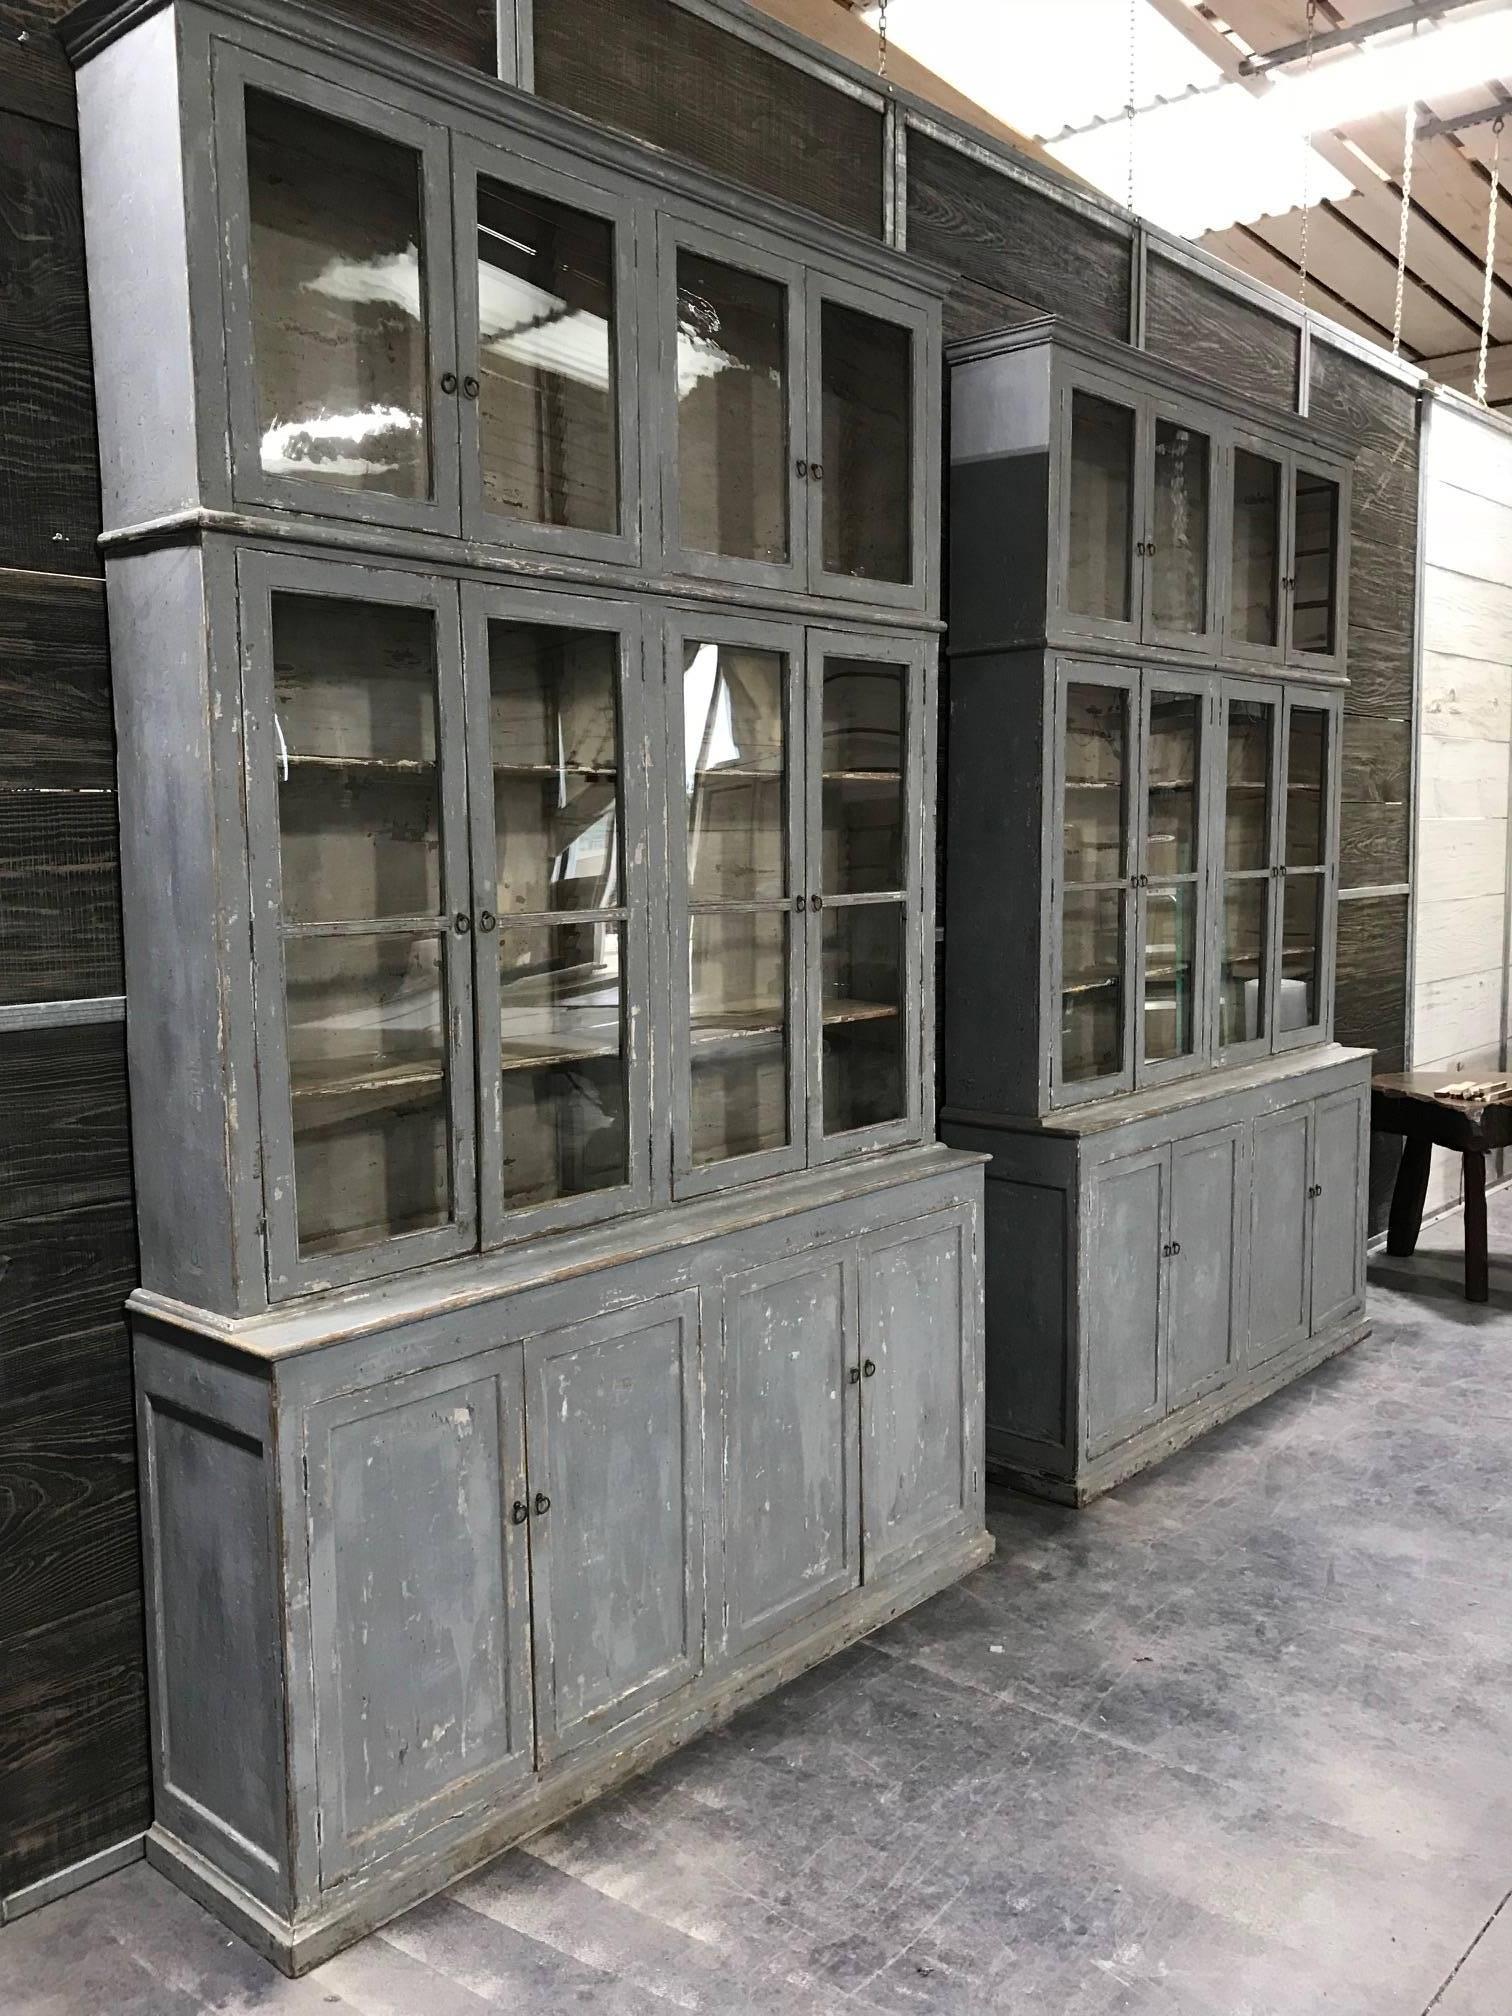 An outstanding and monumental pair of early 19th century bookcases from the Catalan region of Spain. Wonderfully constructed of painted wood and glass, each bookcase is in three sections. These bookcases will add style and elegance to any interior.